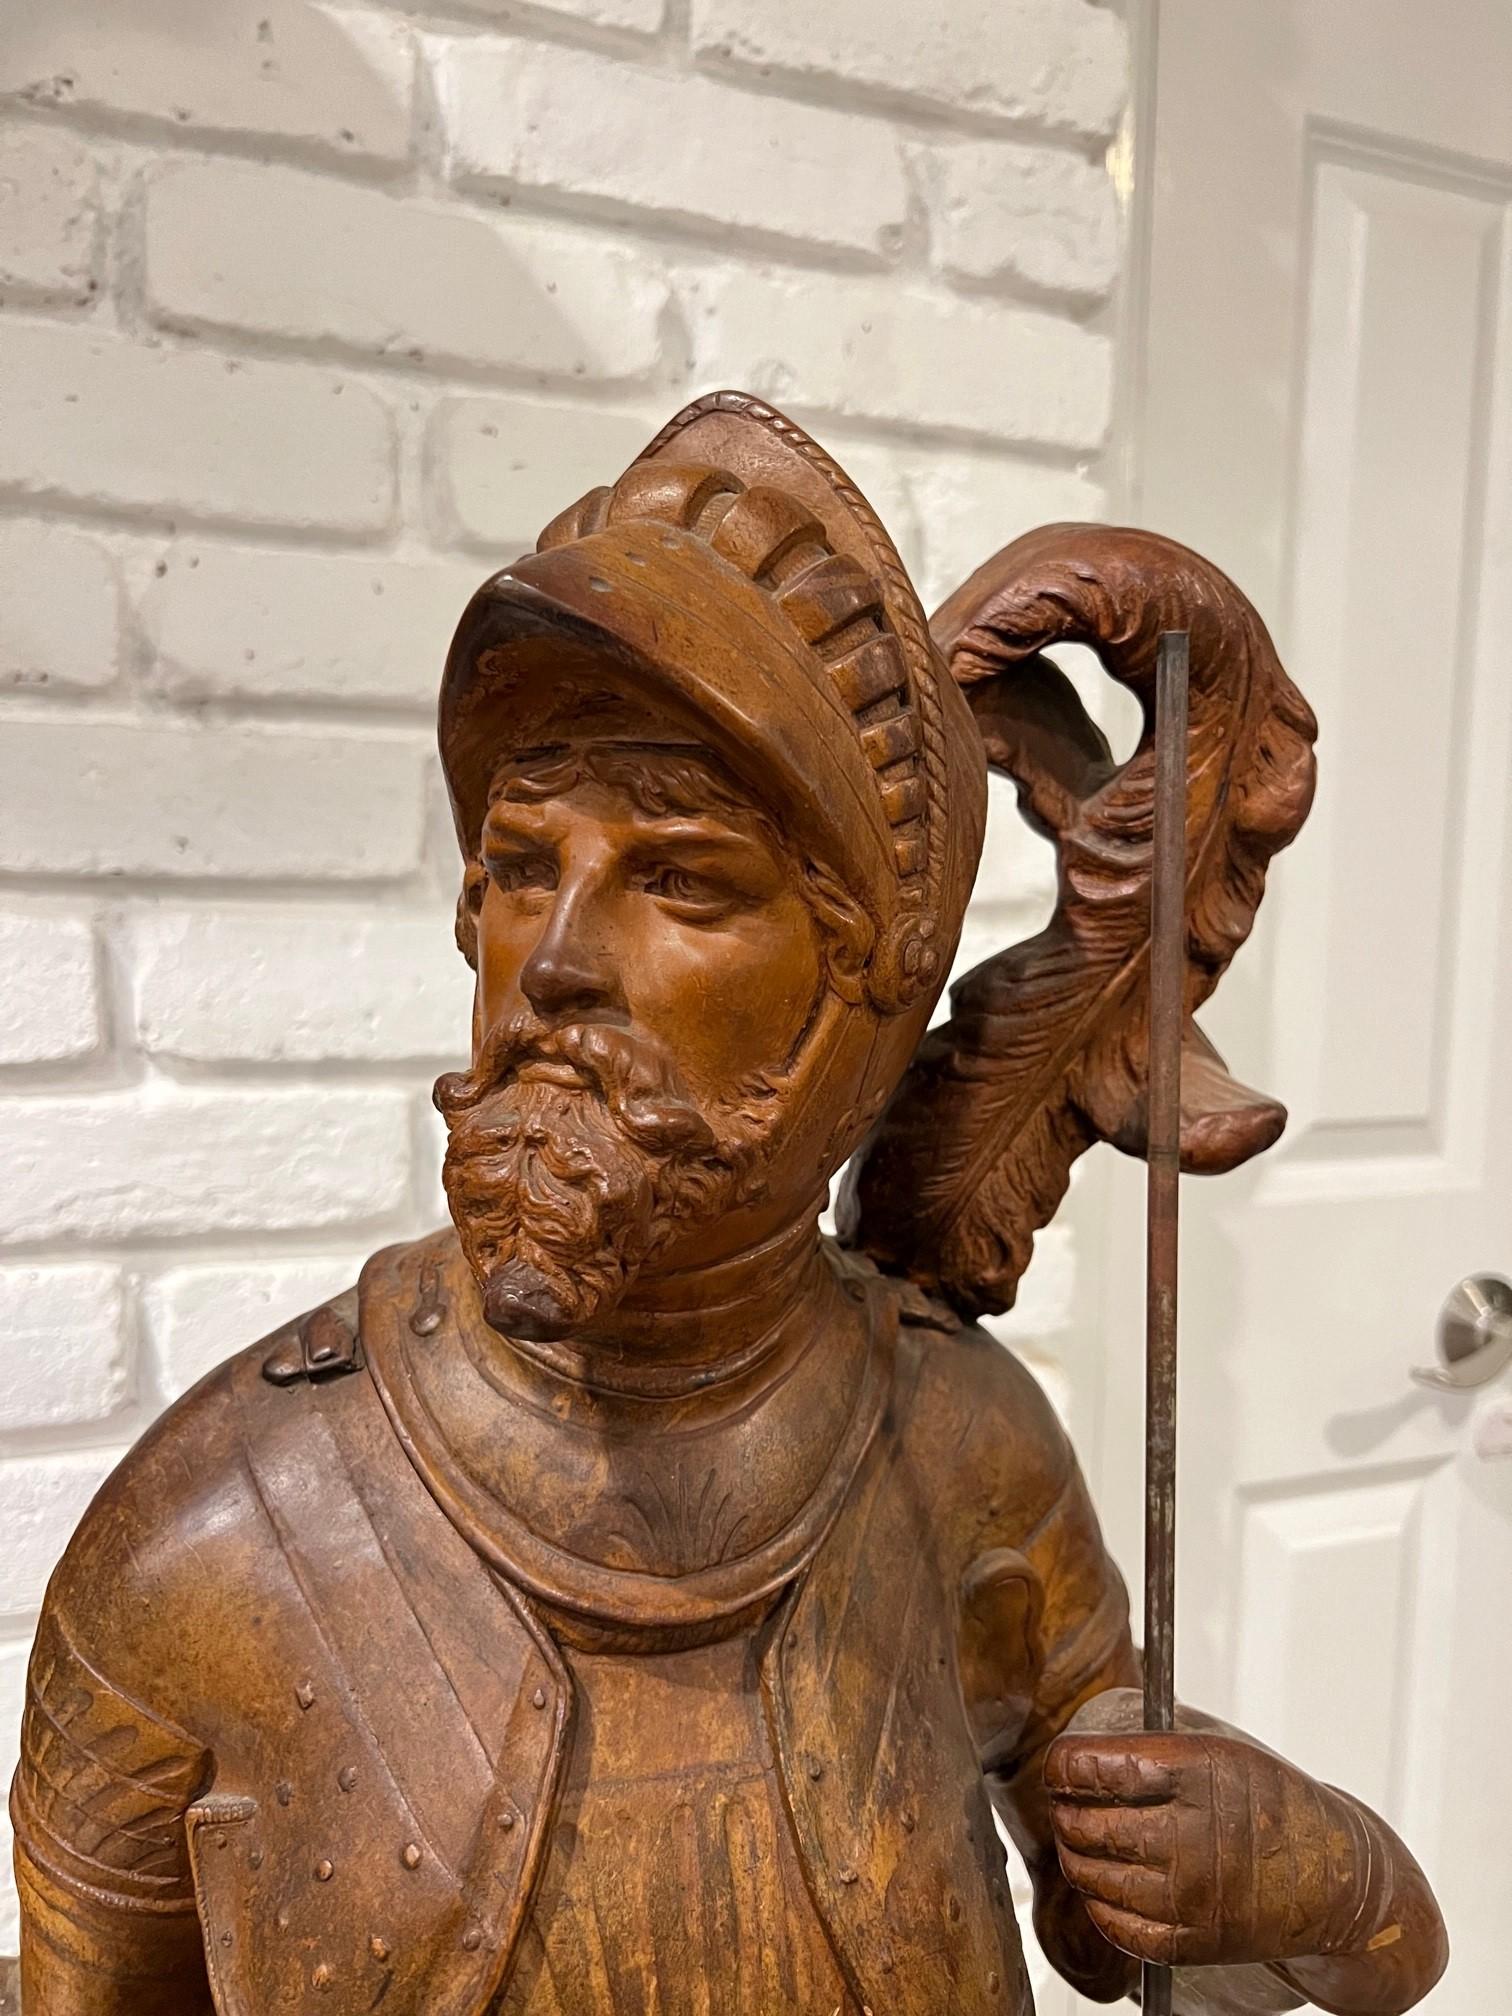 Vintage Terracotta Statue of a Knight in Armor Tomaso Gandolfo   In Good Condition For Sale In Stamford, CT